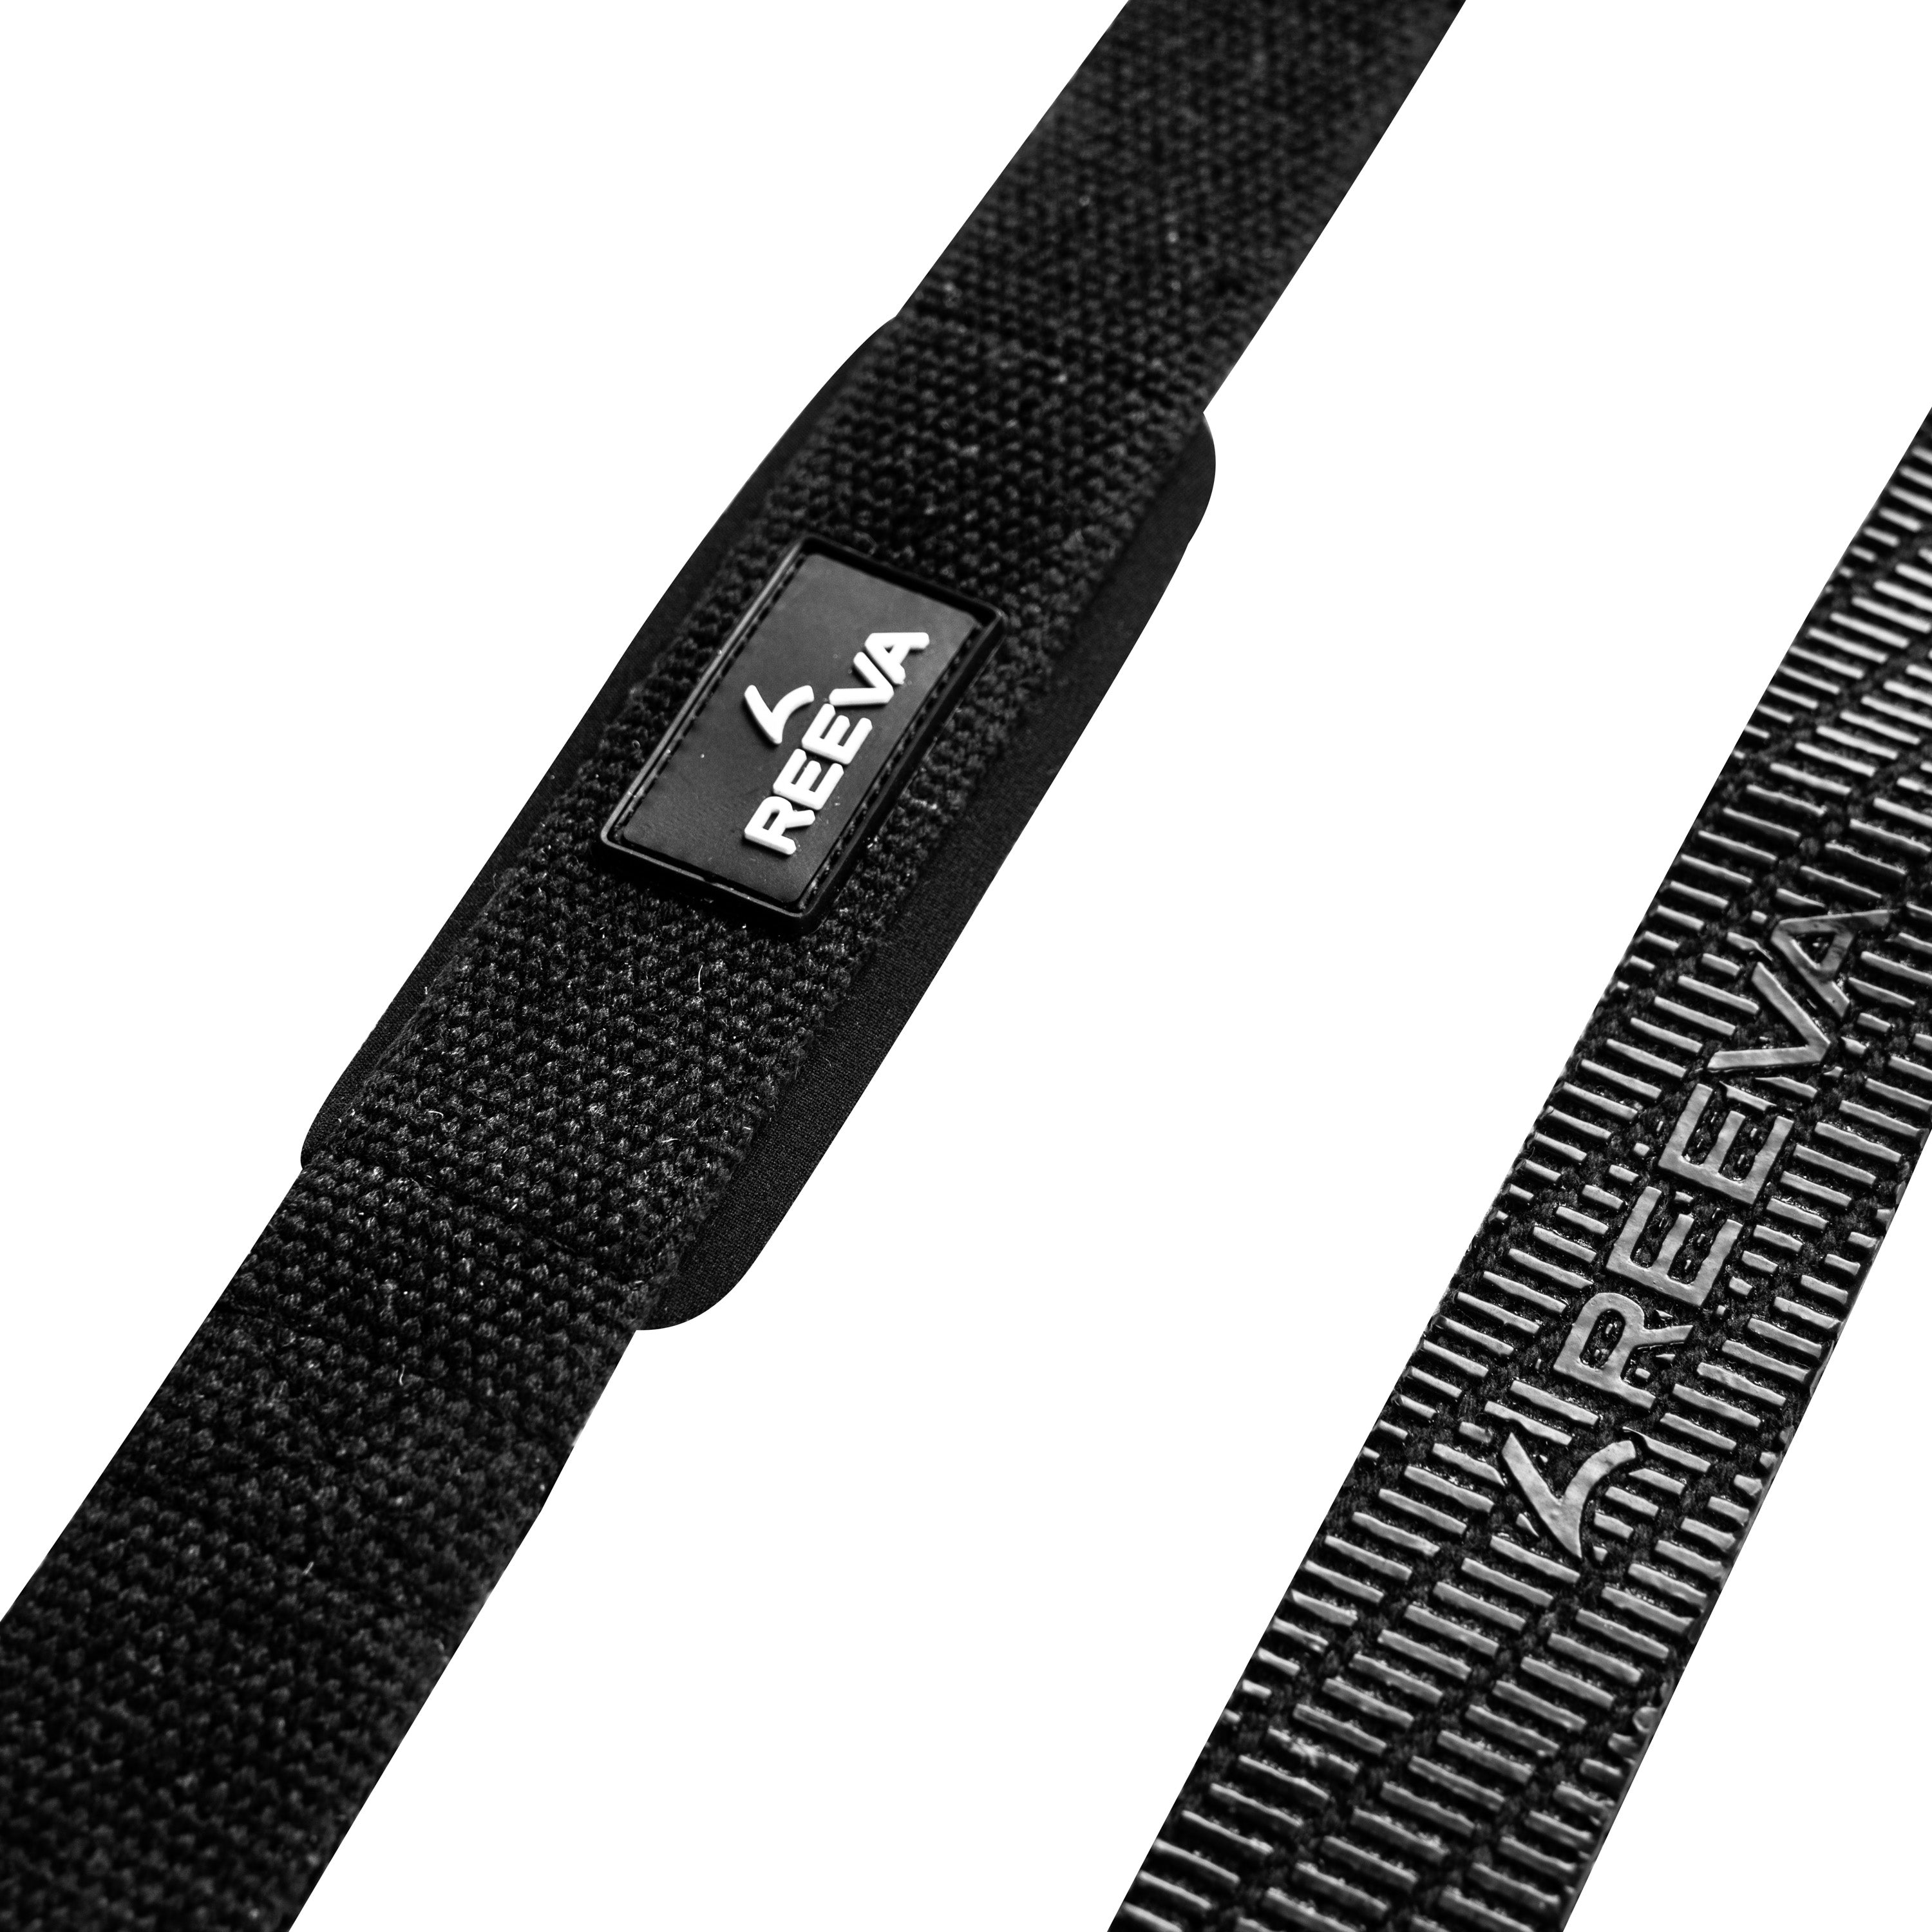 Lifting Straps with padding - sold per pair